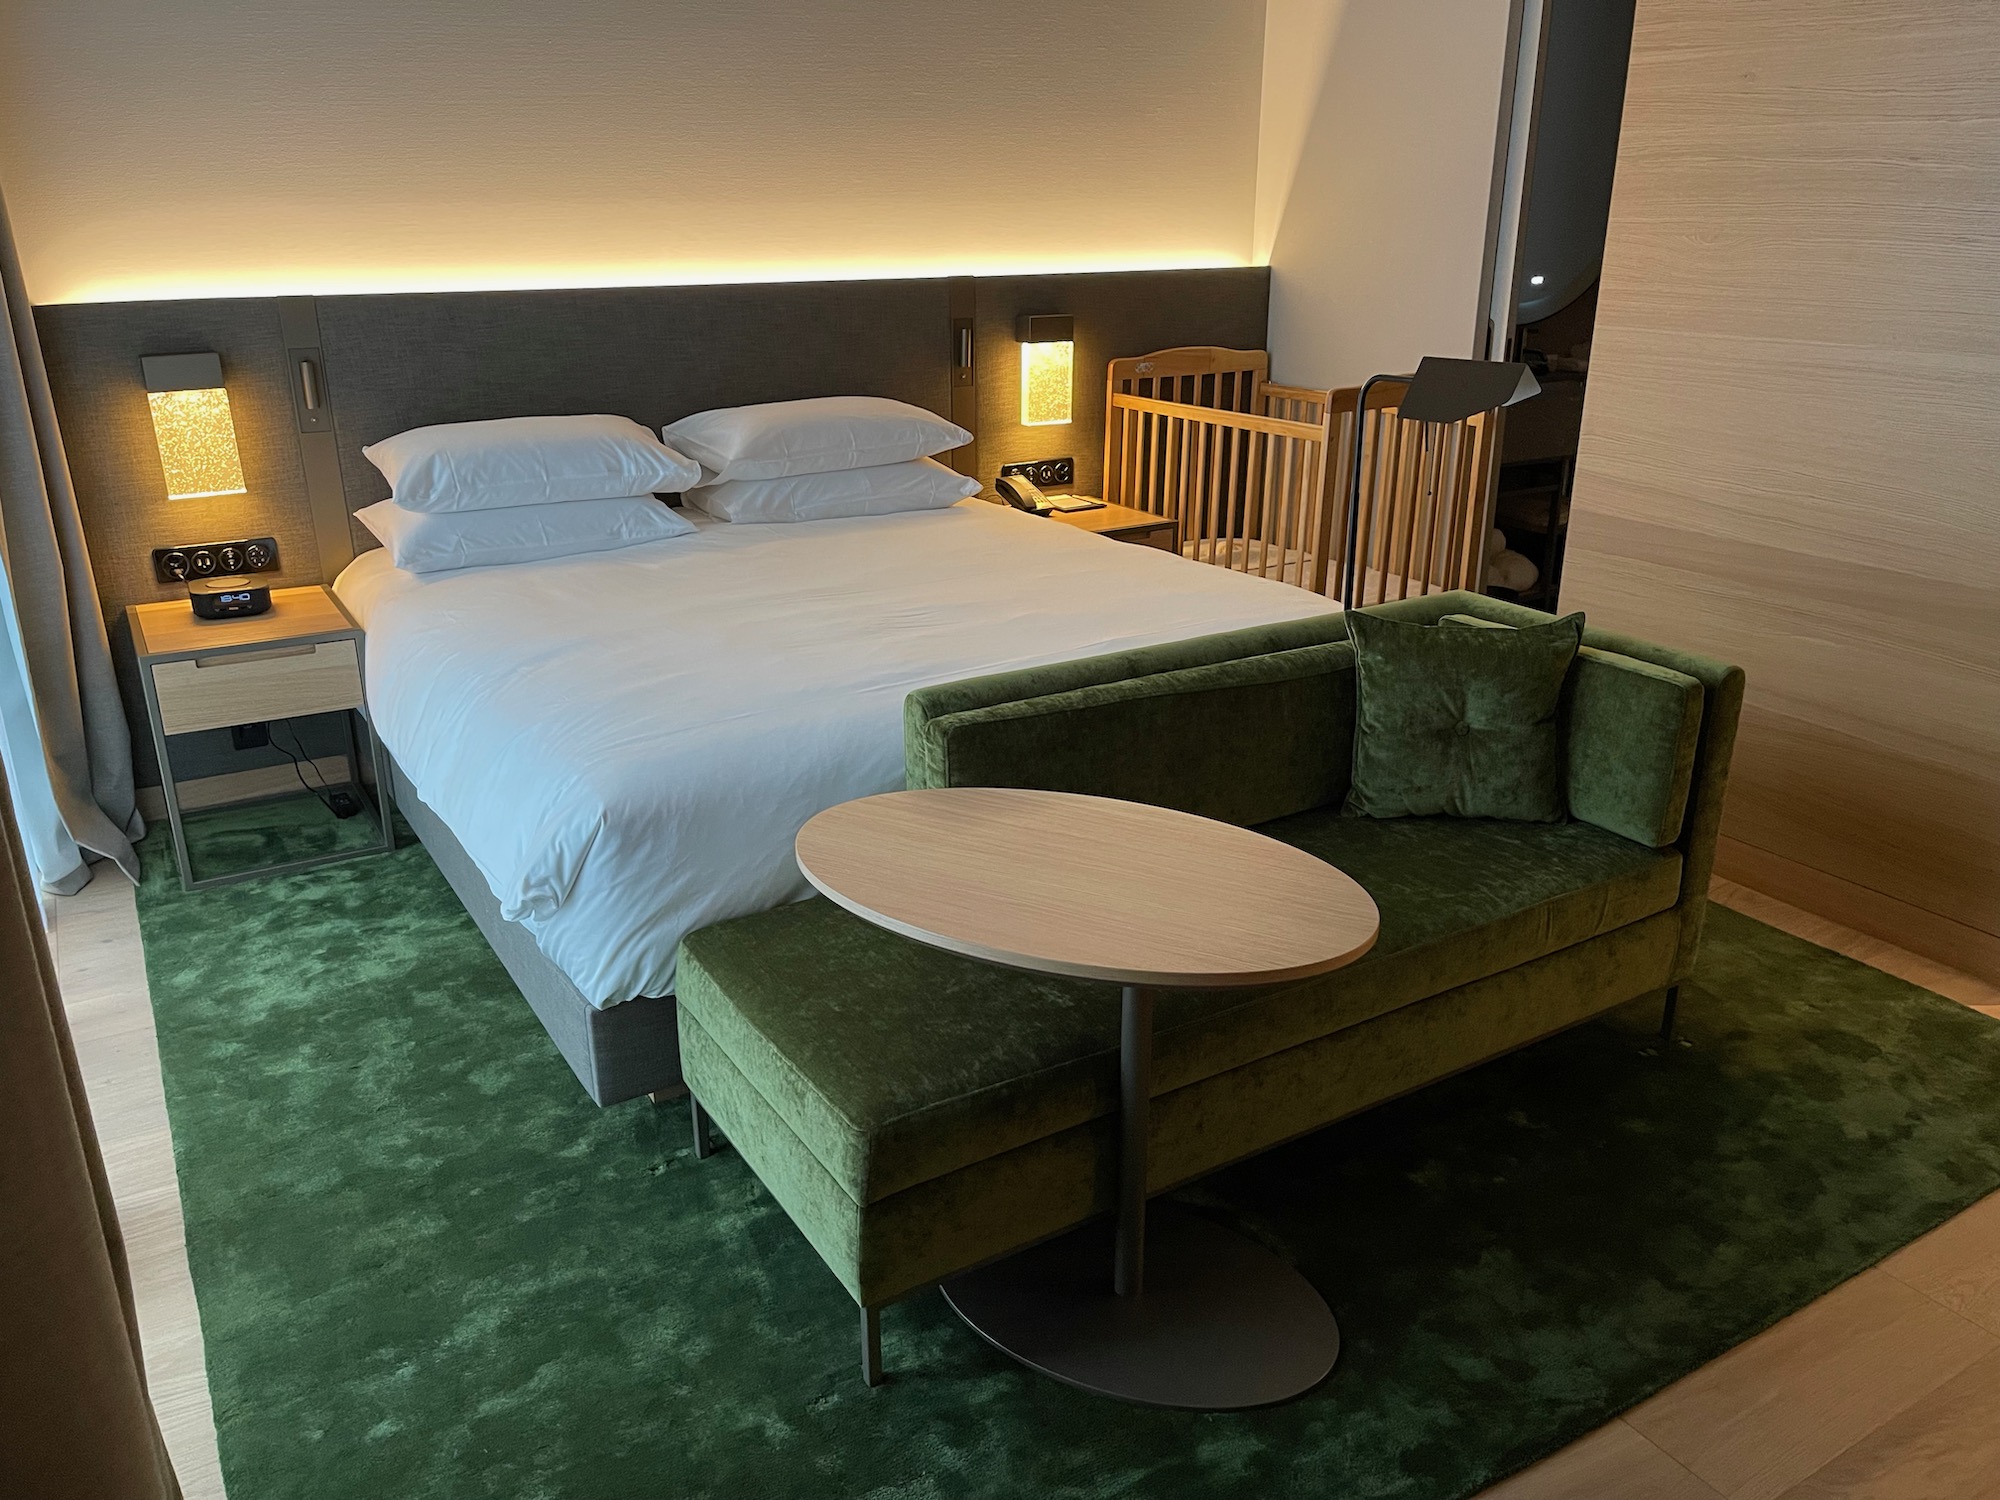 a bed with a green couch and a round table